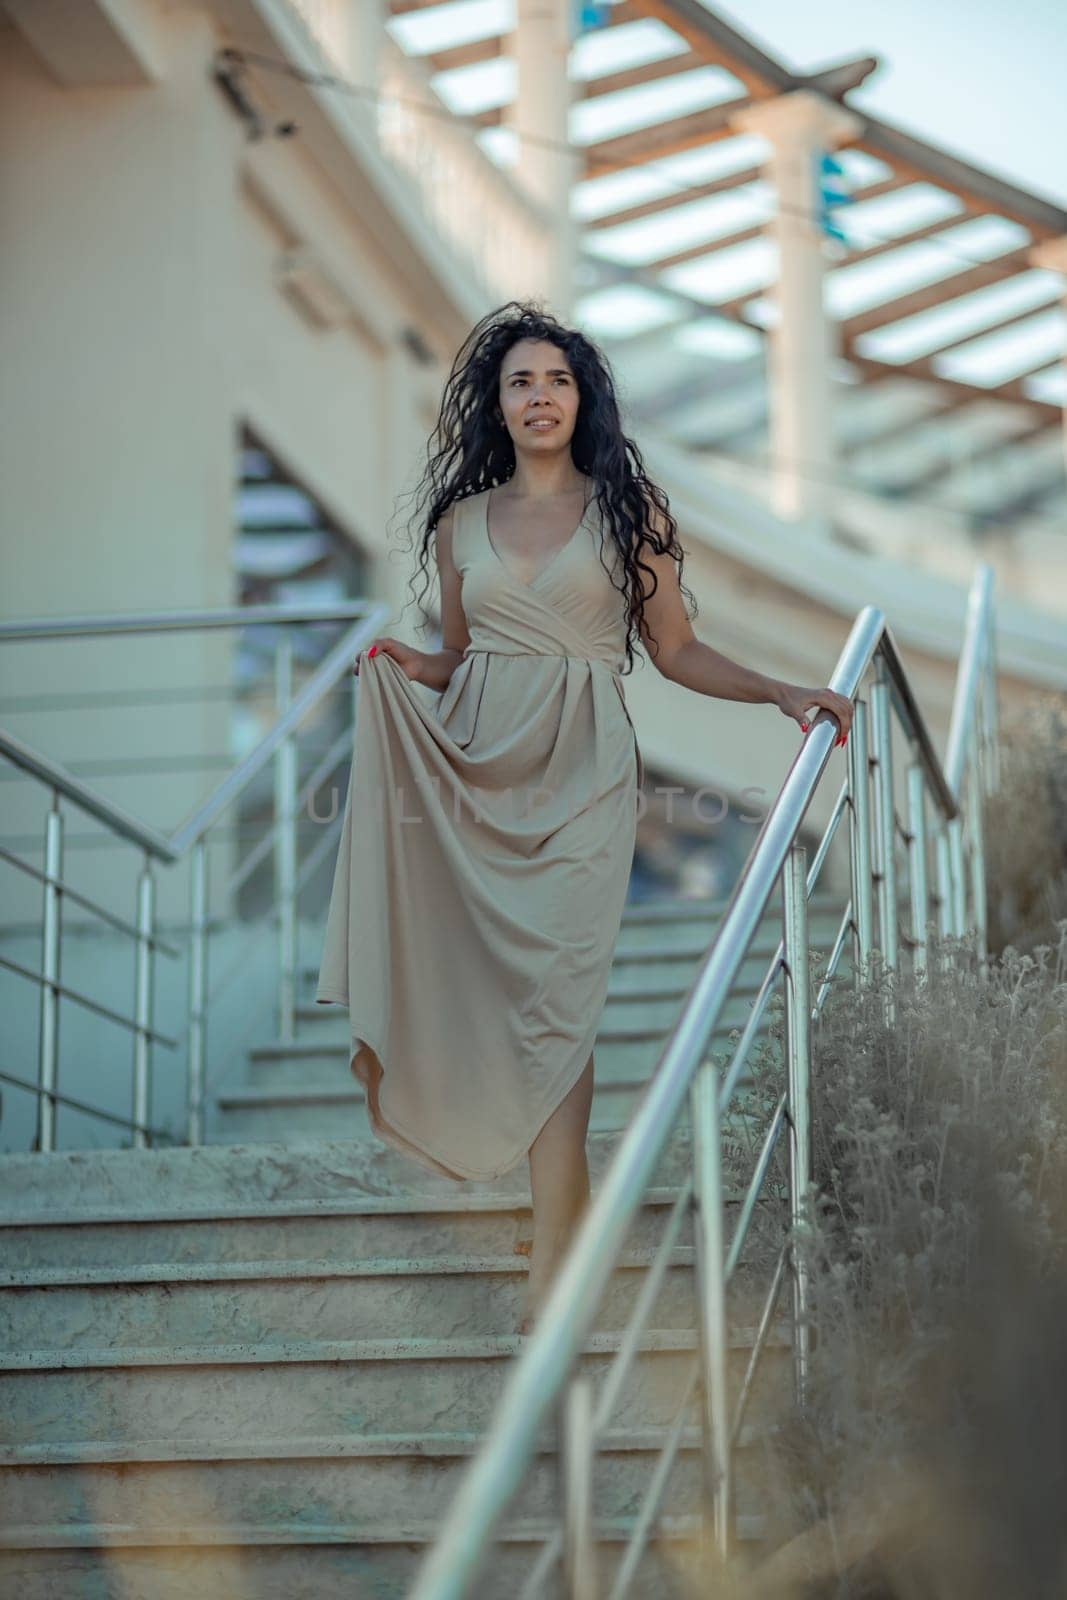 A woman in a dress stands on a set of stairs. The stairs are made of metal and are located in front of a building. The woman is wearing a necklace and a bracelet. by Matiunina